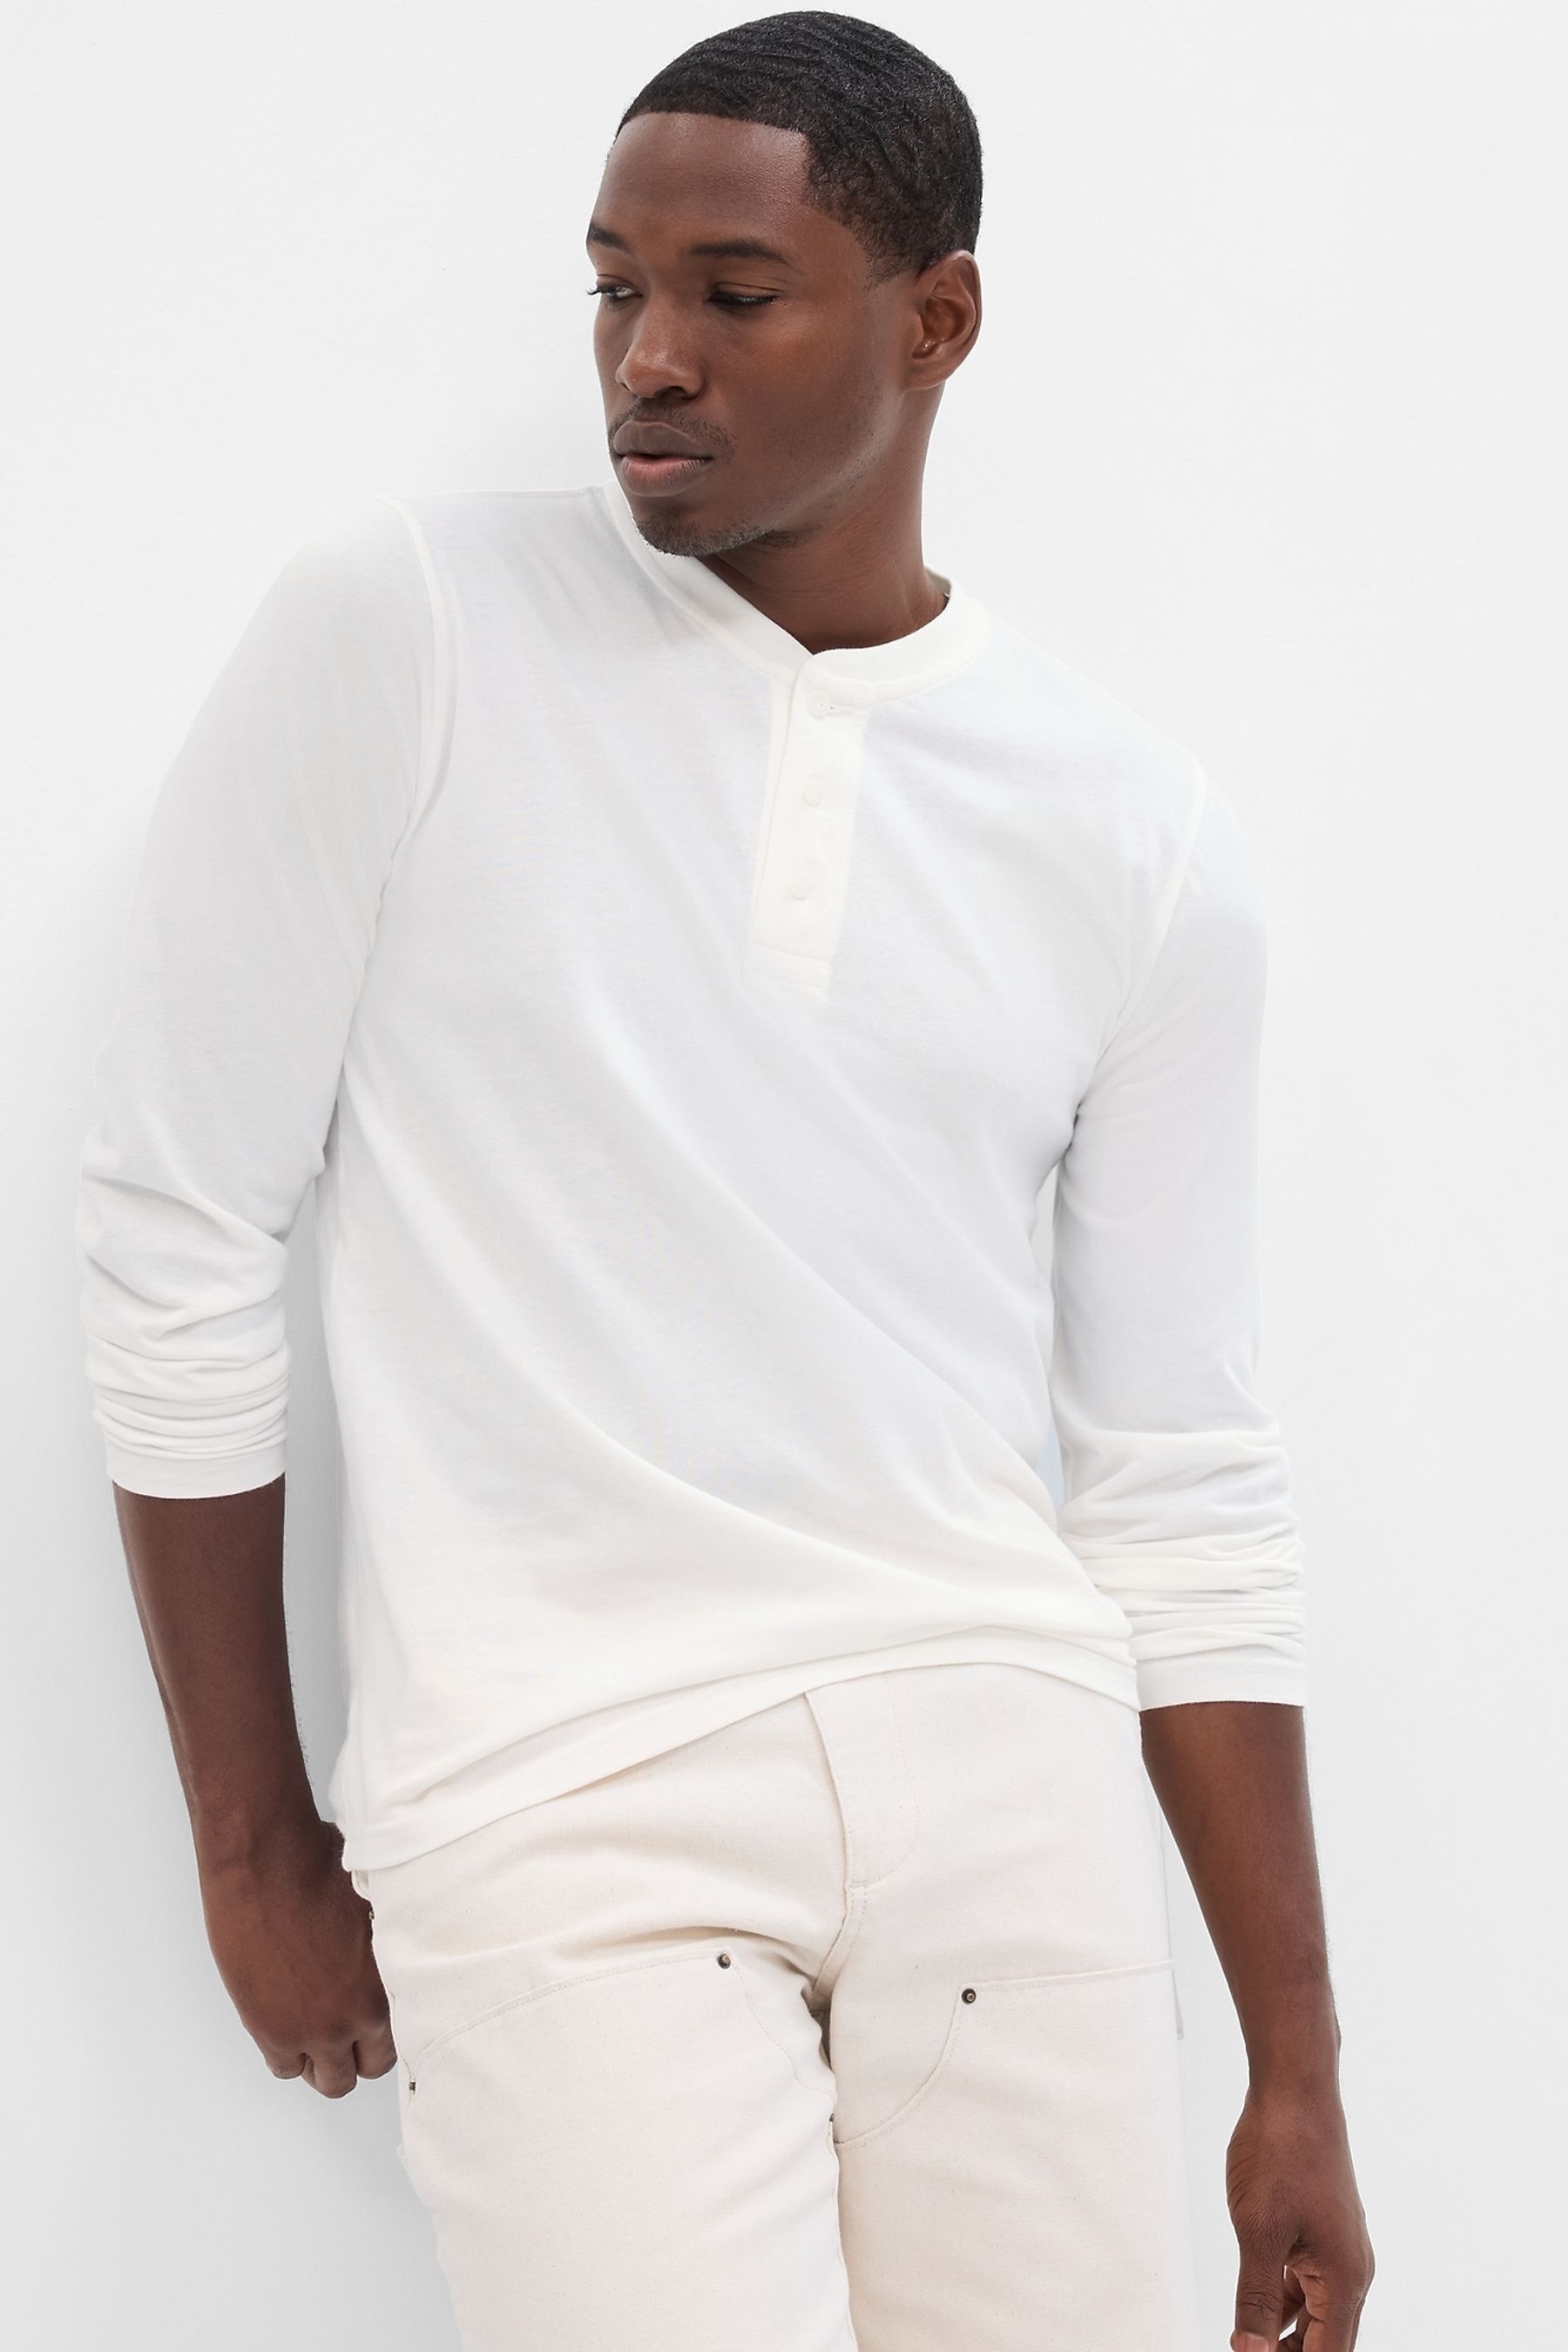 Buy Gap Everyday Soft Henley Long Sleeve T-Shirt from the Gap online shop